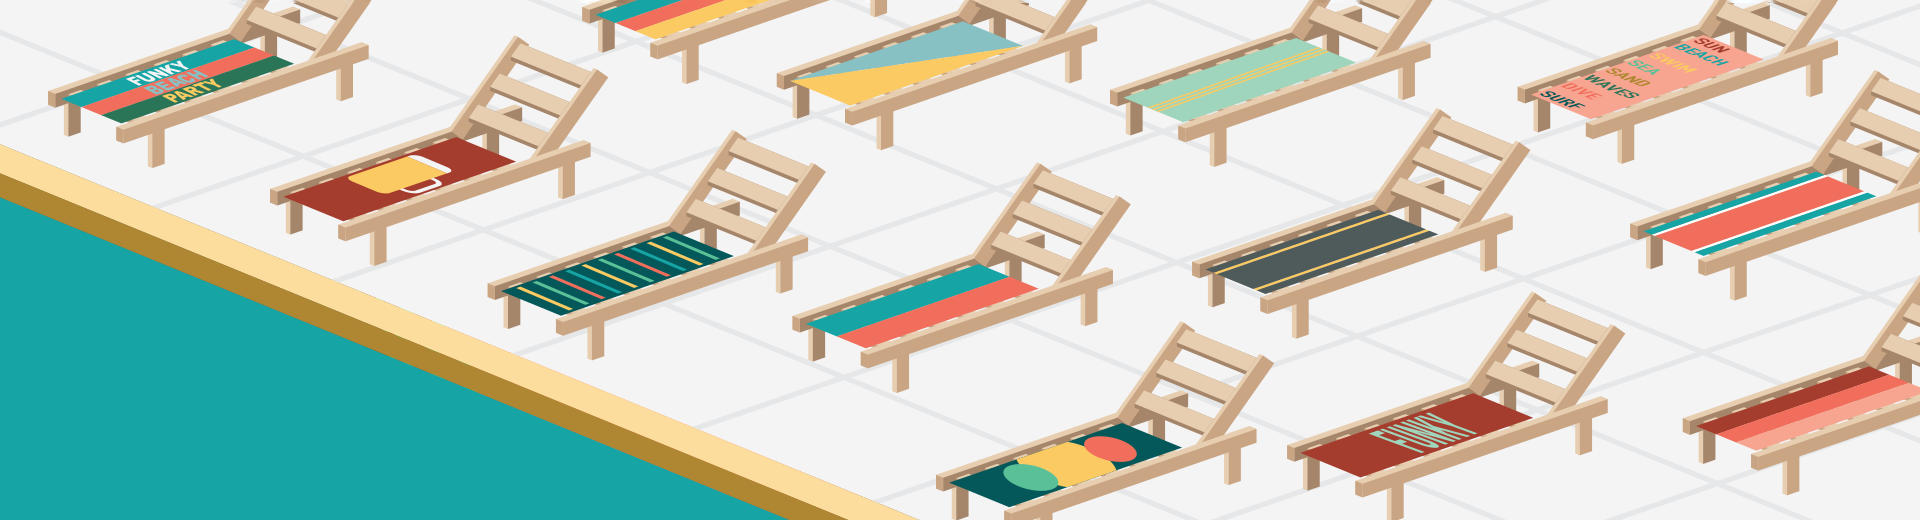 An asortment of deck chairs positioned in front of a pool, each with a towel on top 'reserving' it